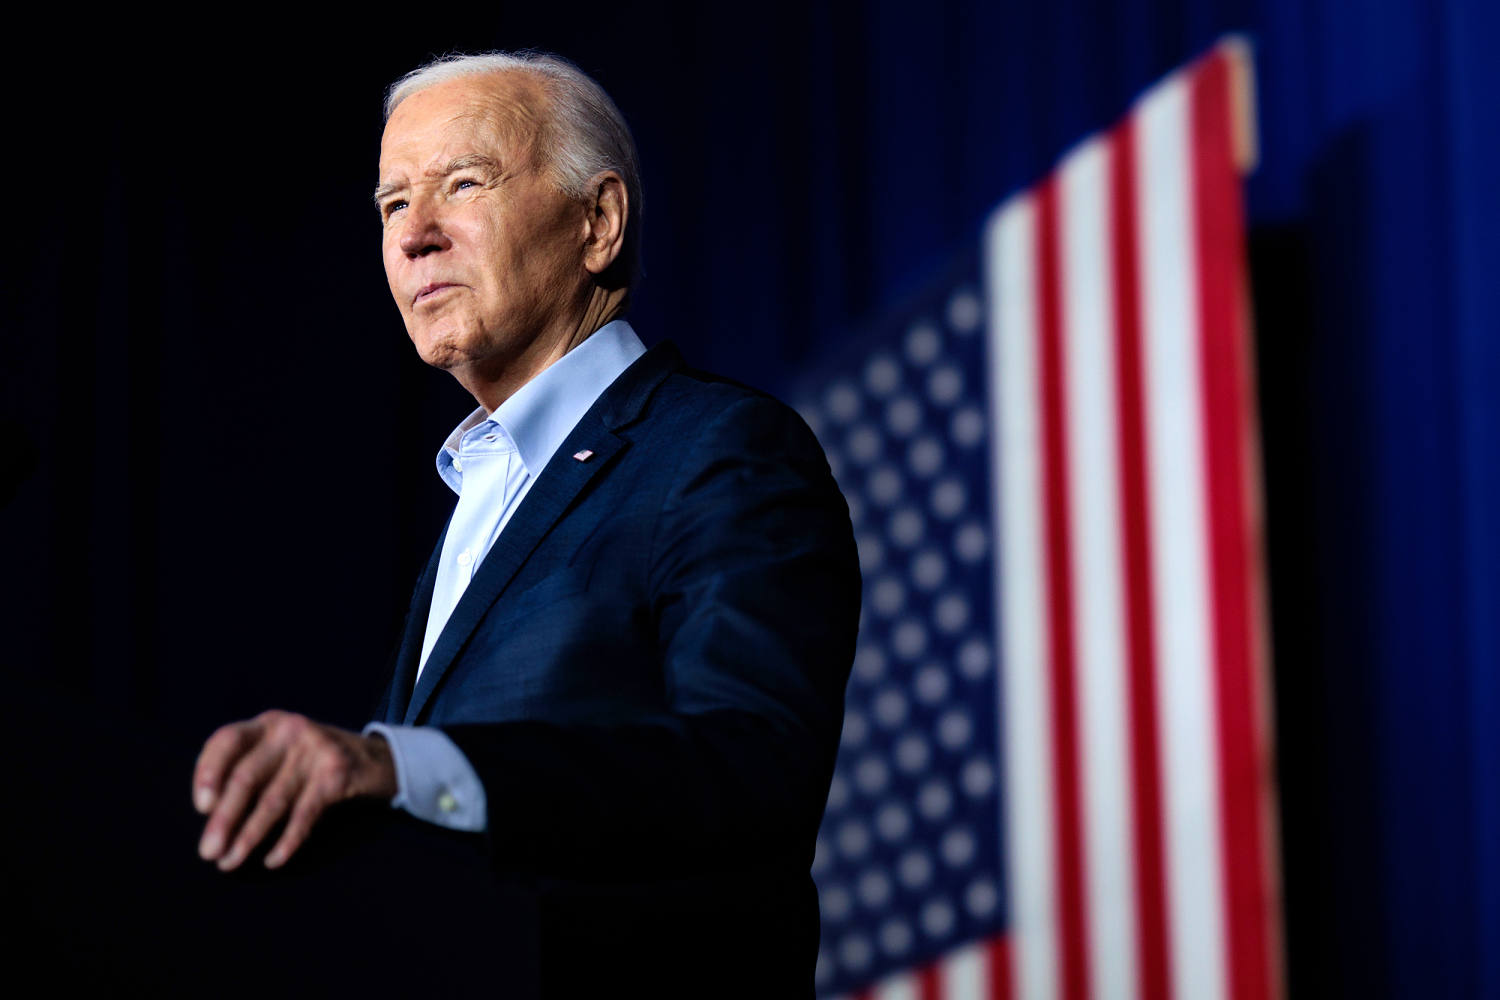 Biden says the U.S. will not supply Israel with certain weapons if it invades Rafah